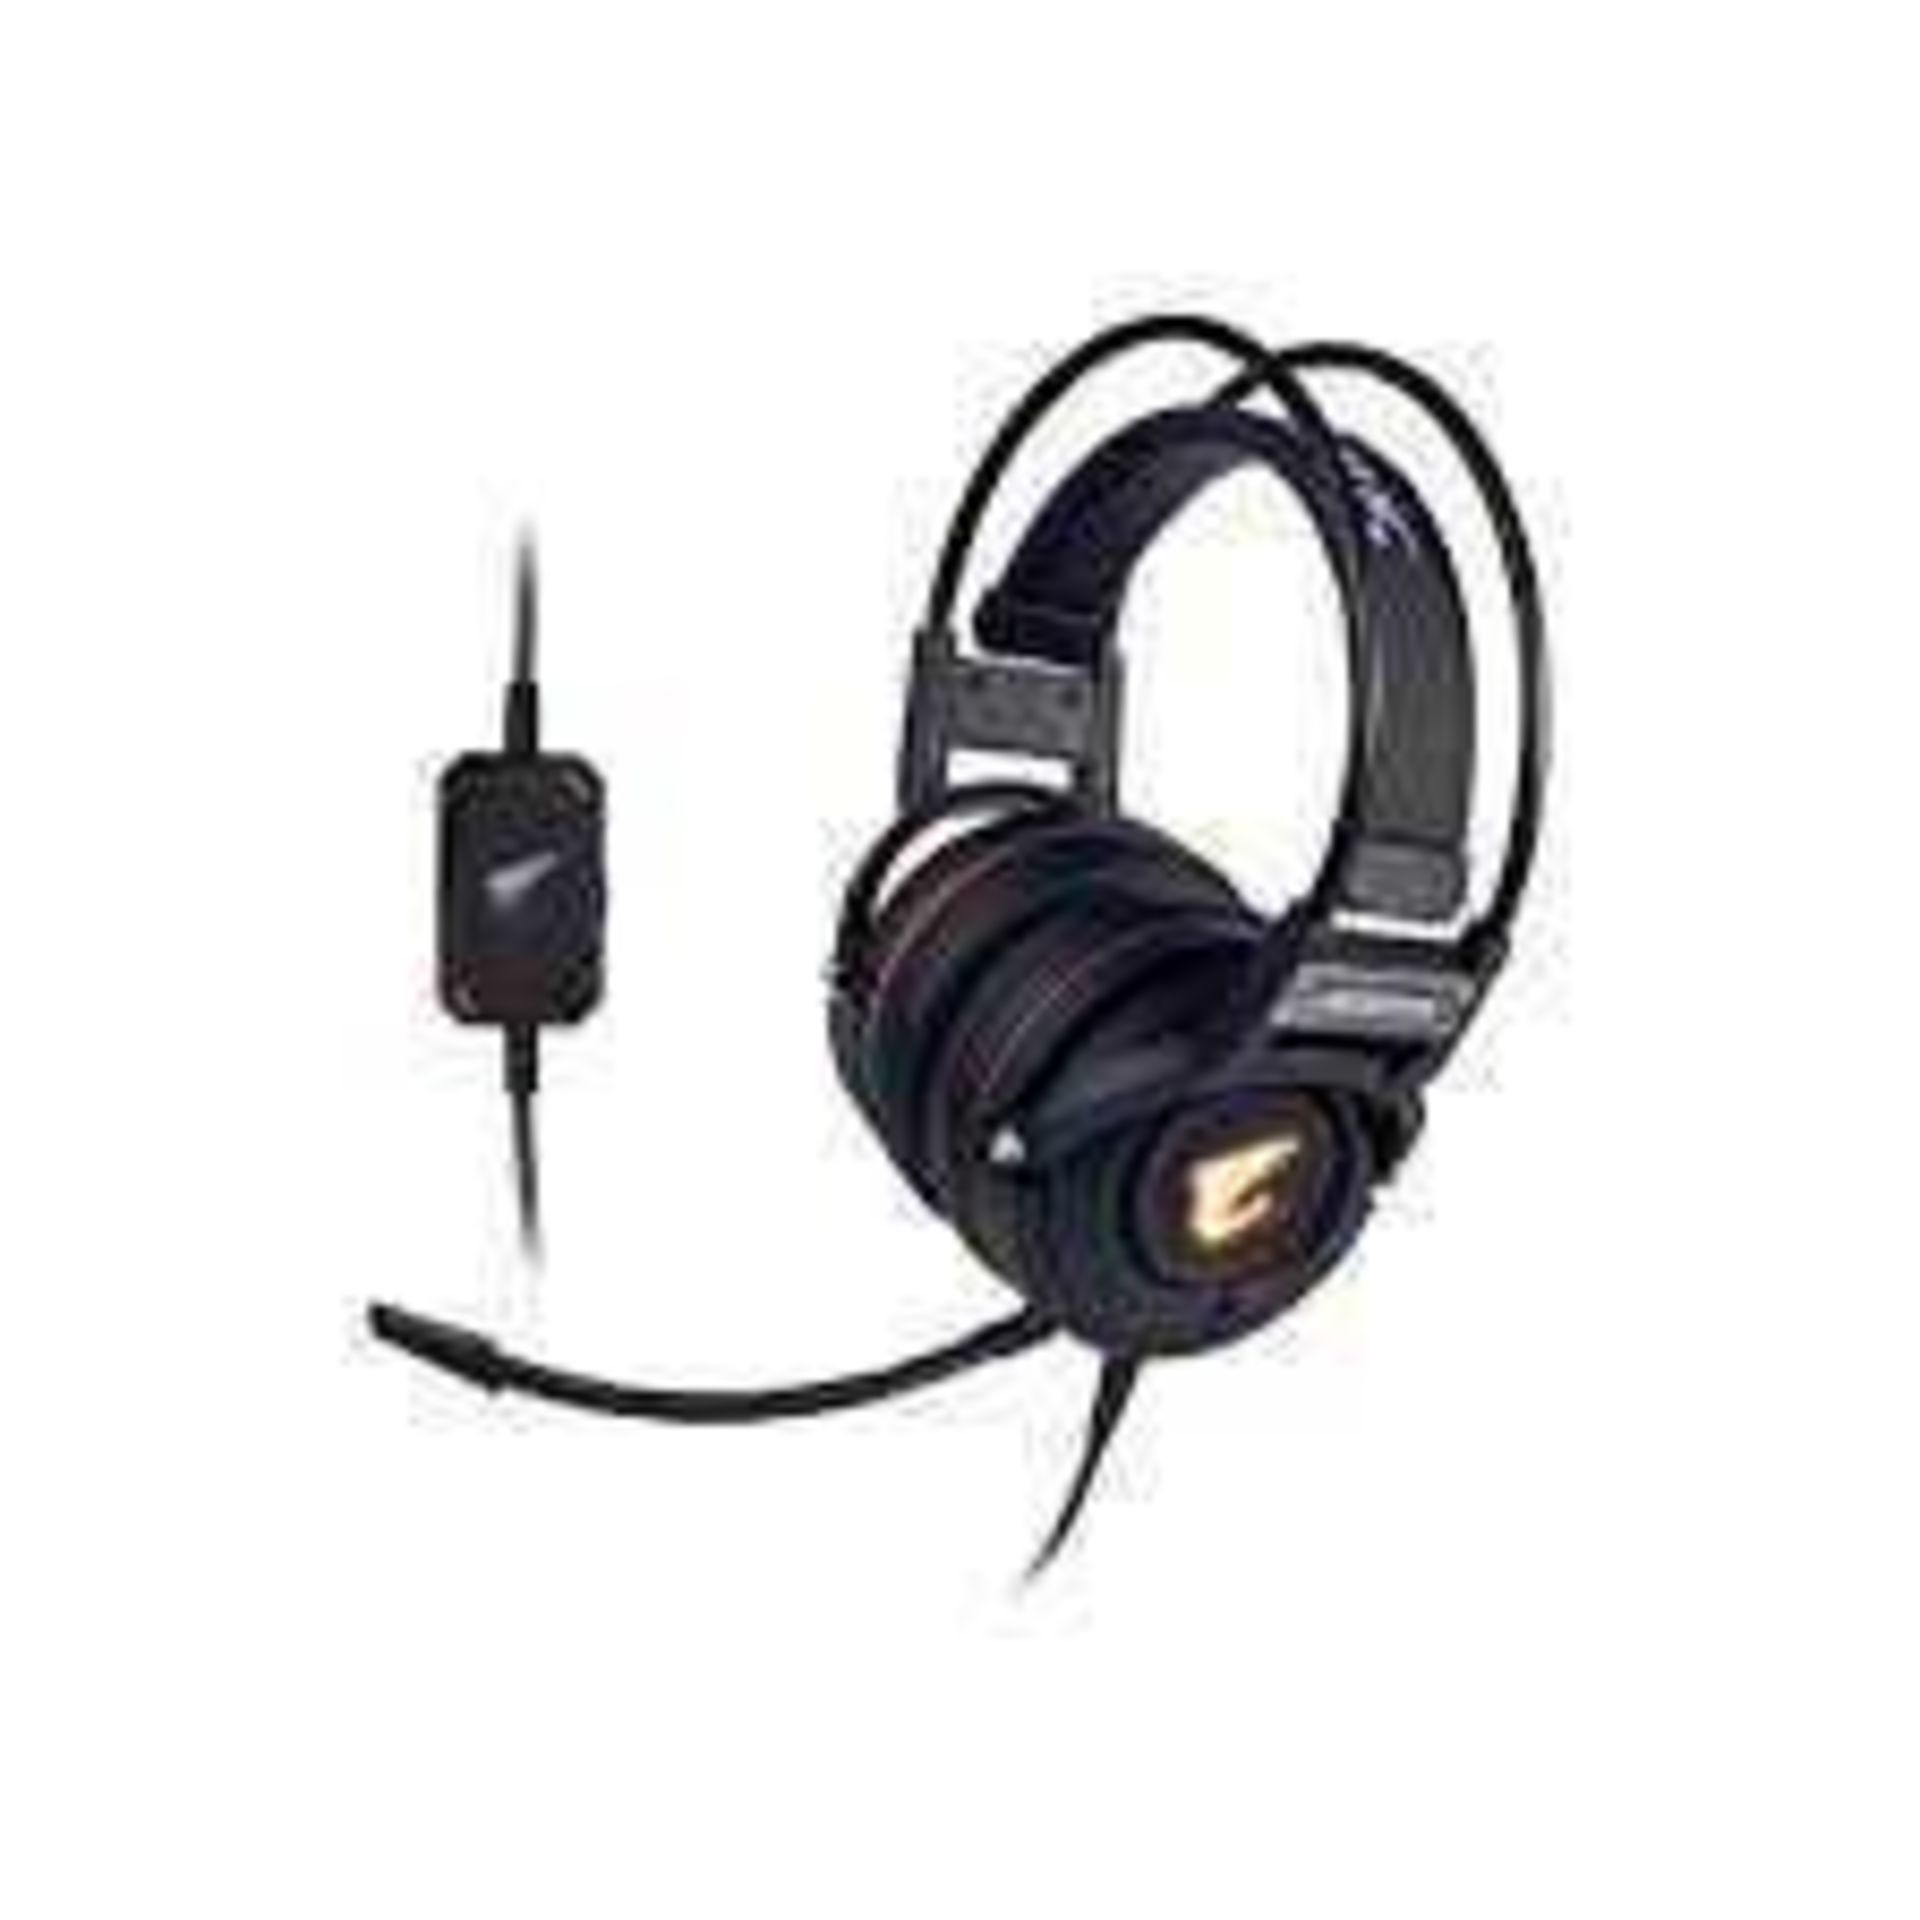 RRP £50 lot to contain arouse gaming headset in Black